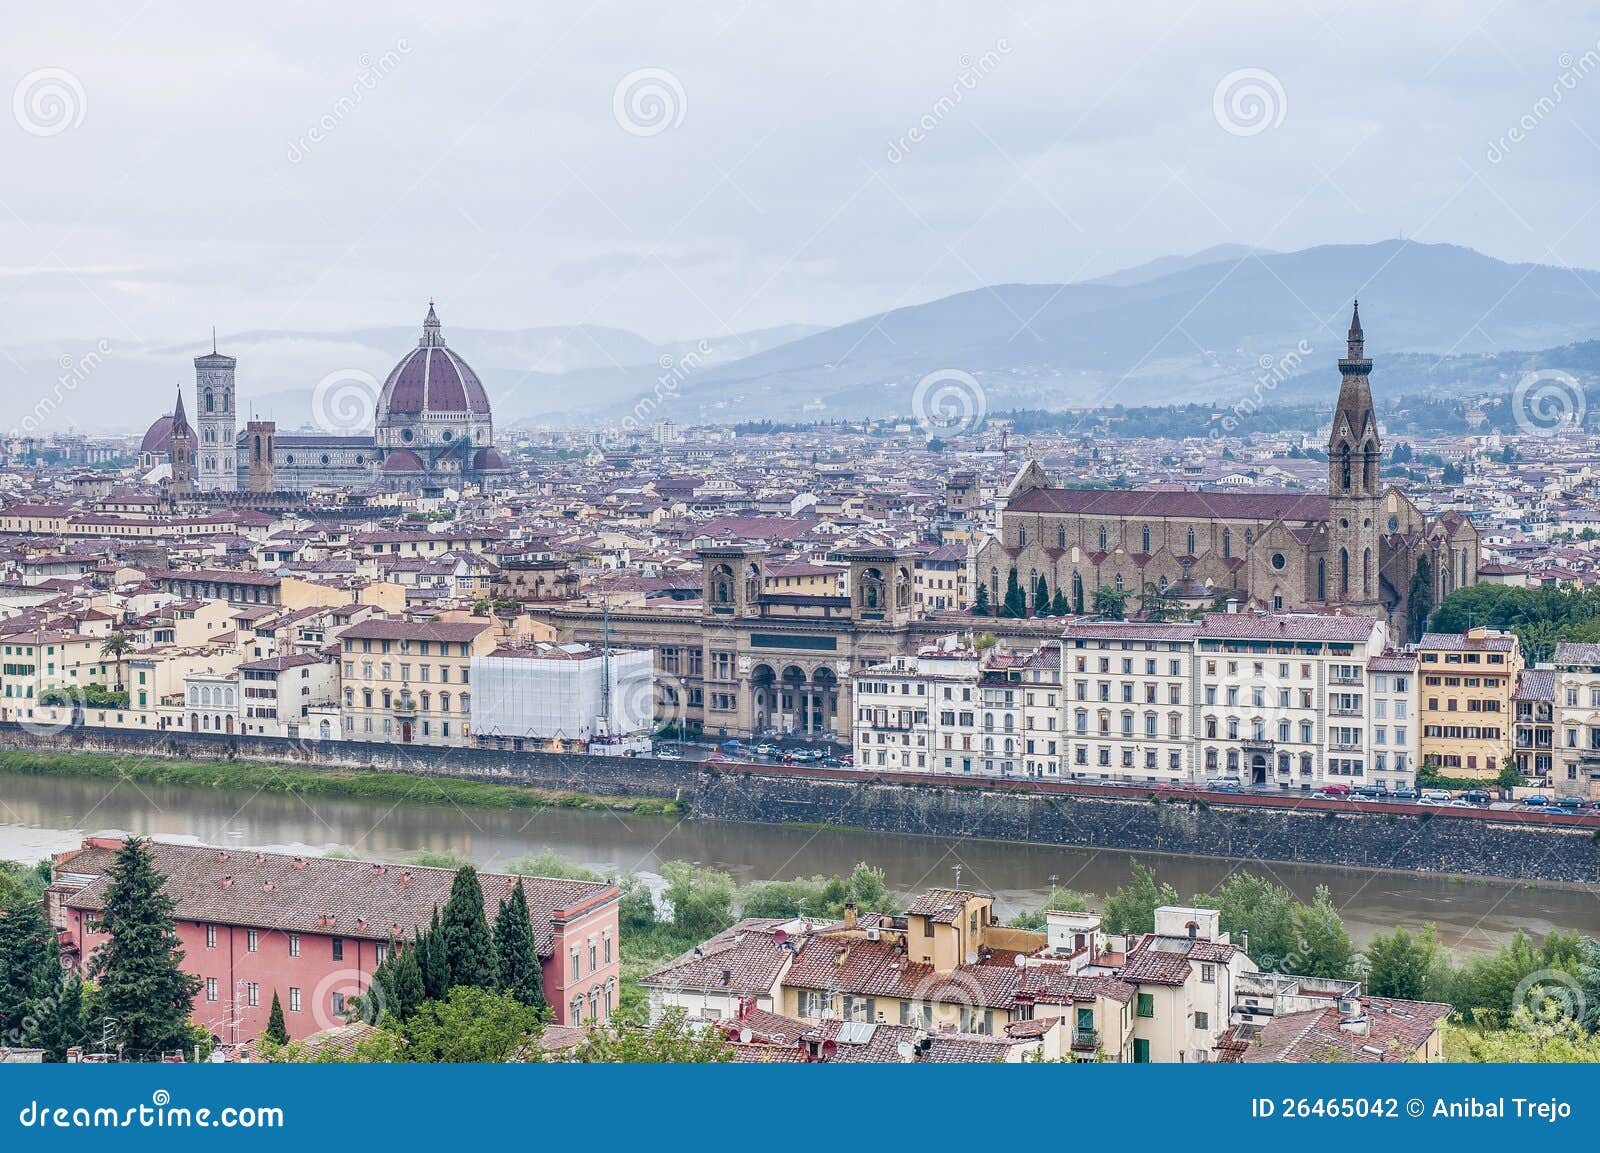 florence seen from piazzale michelangelo, italy